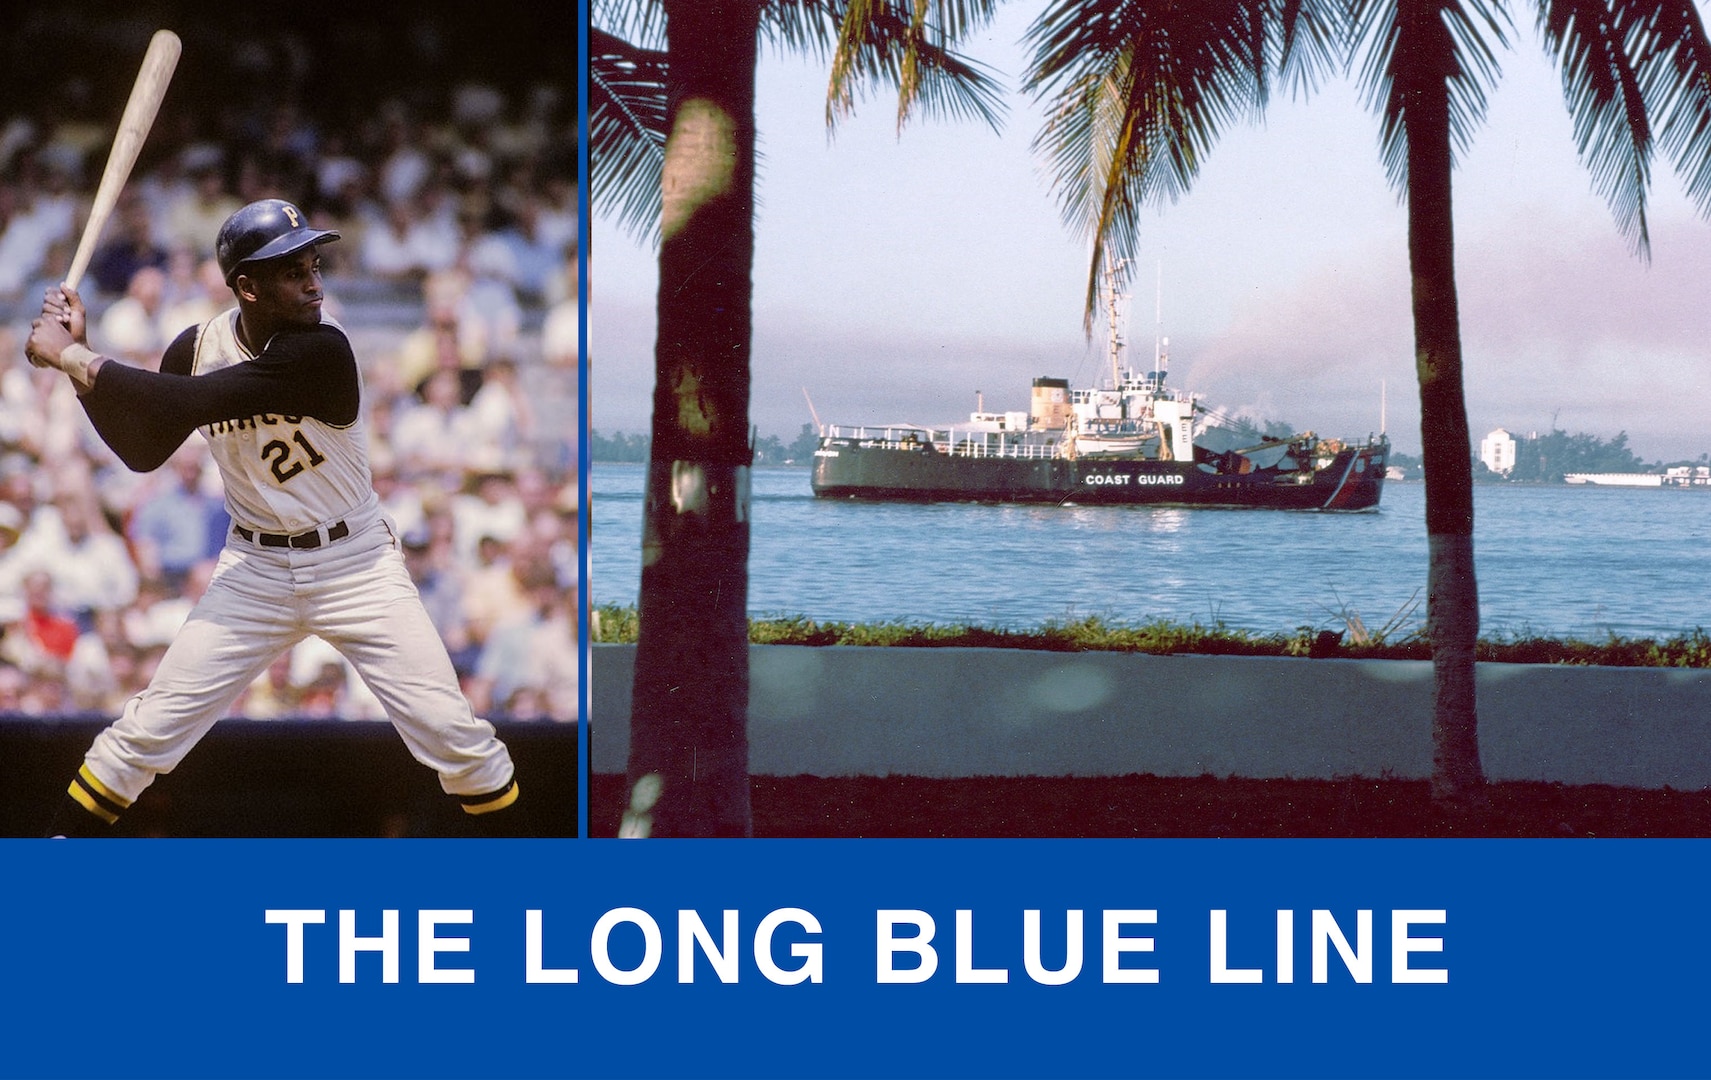 The Long Blue Line: Sagebrush's search for Pittsburgh Pirates